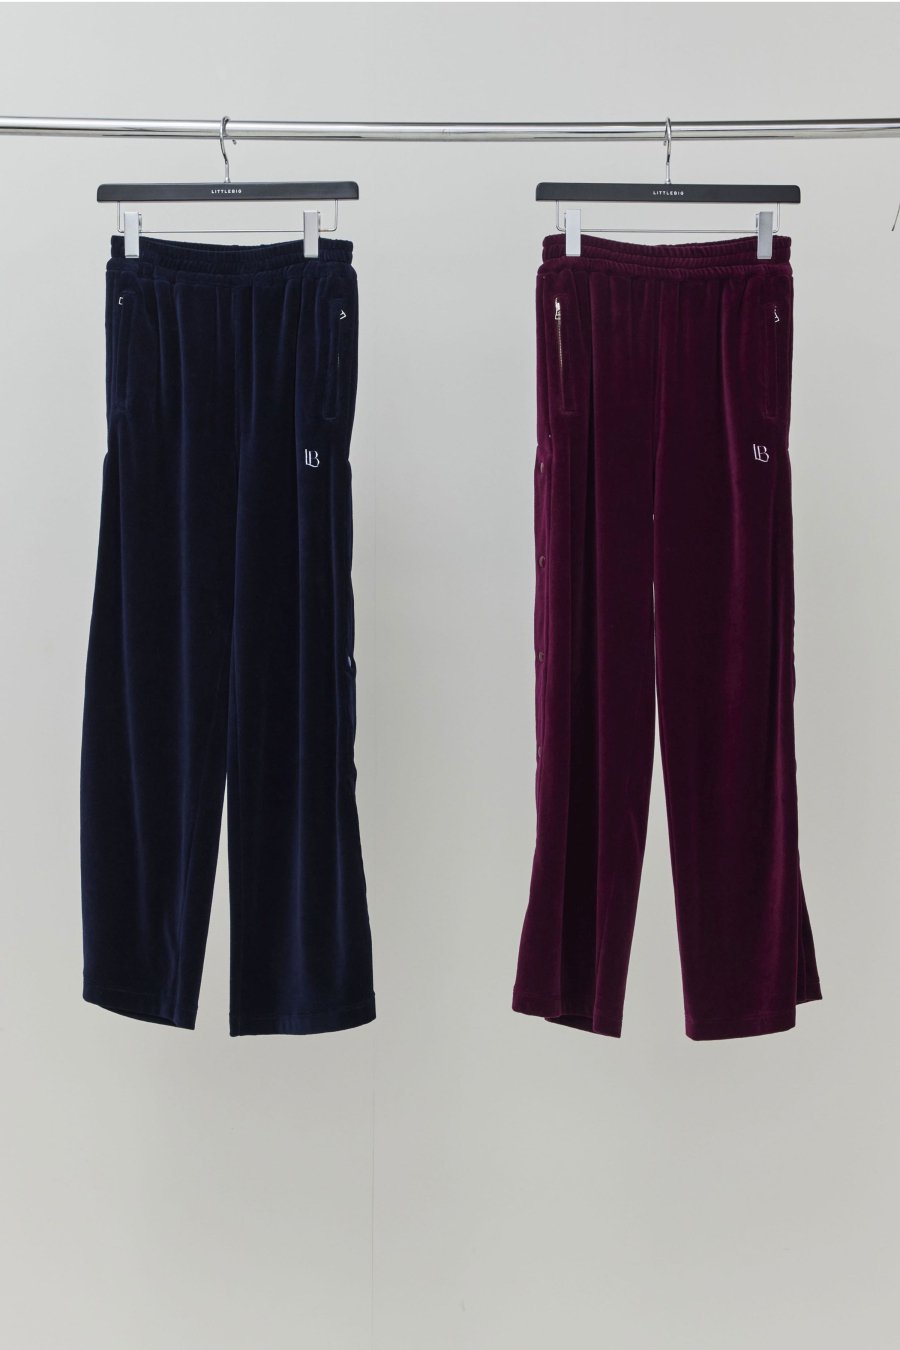 LITTLEBIG 22aw Velour Track Pants(Bordeaux)<img class='new_mark_img2' src='https://img.shop-pro.jp/img/new/icons15.gif' style='border:none;display:inline;margin:0px;padding:0px;width:auto;' />